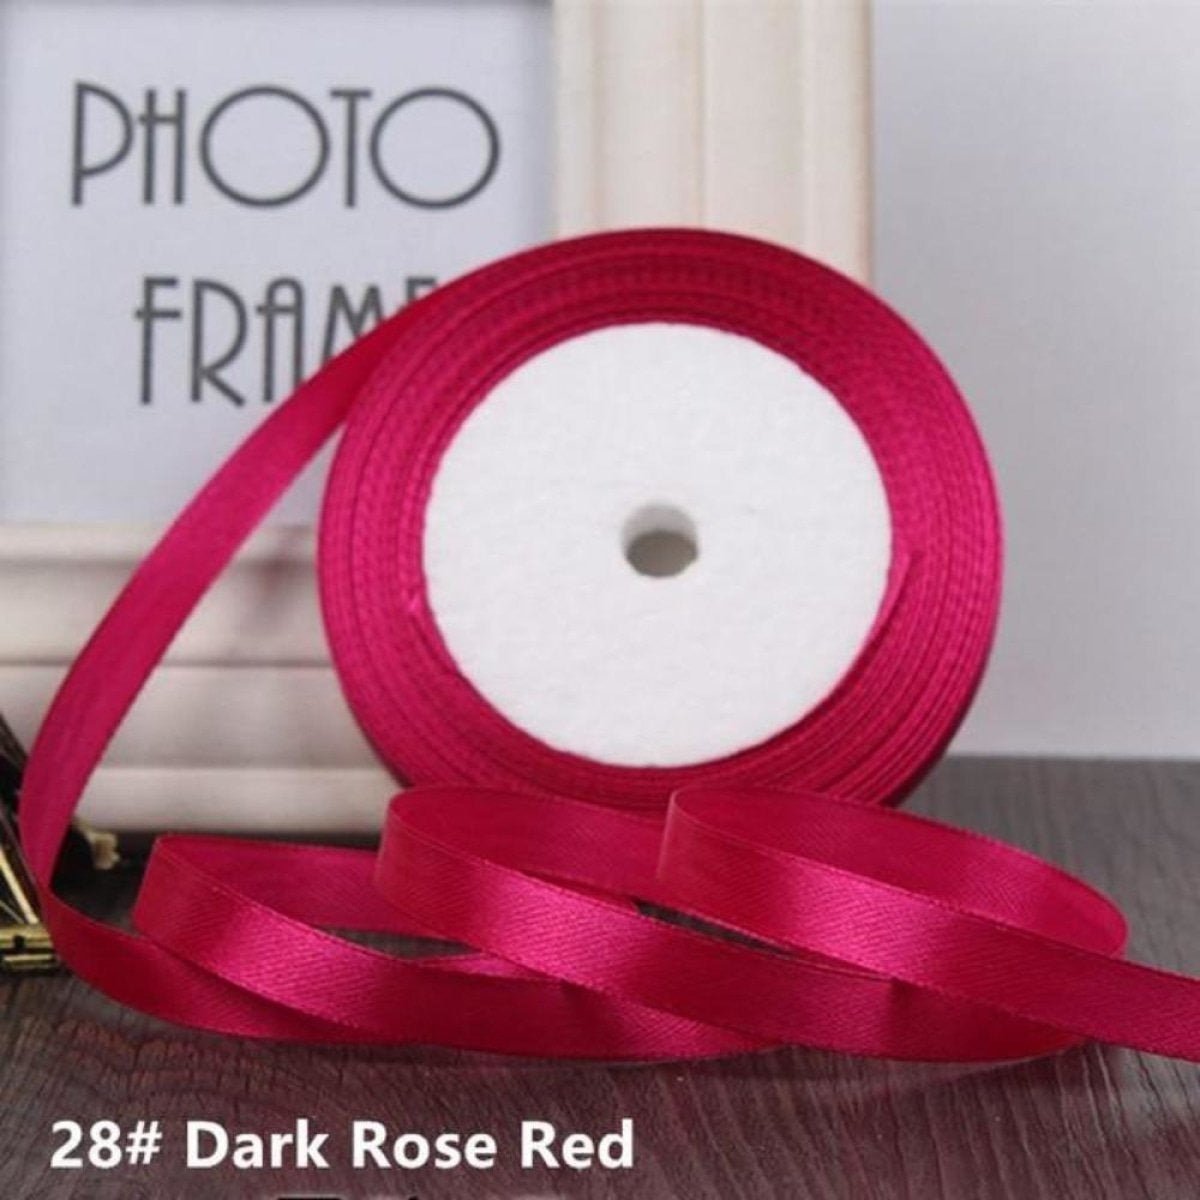 22m 10mm-15mm Polyester Ribbon for Crafts Bow Gift Wrapping Party Wedding Hair - Dark Rose Red 10mm - - Asia Sell